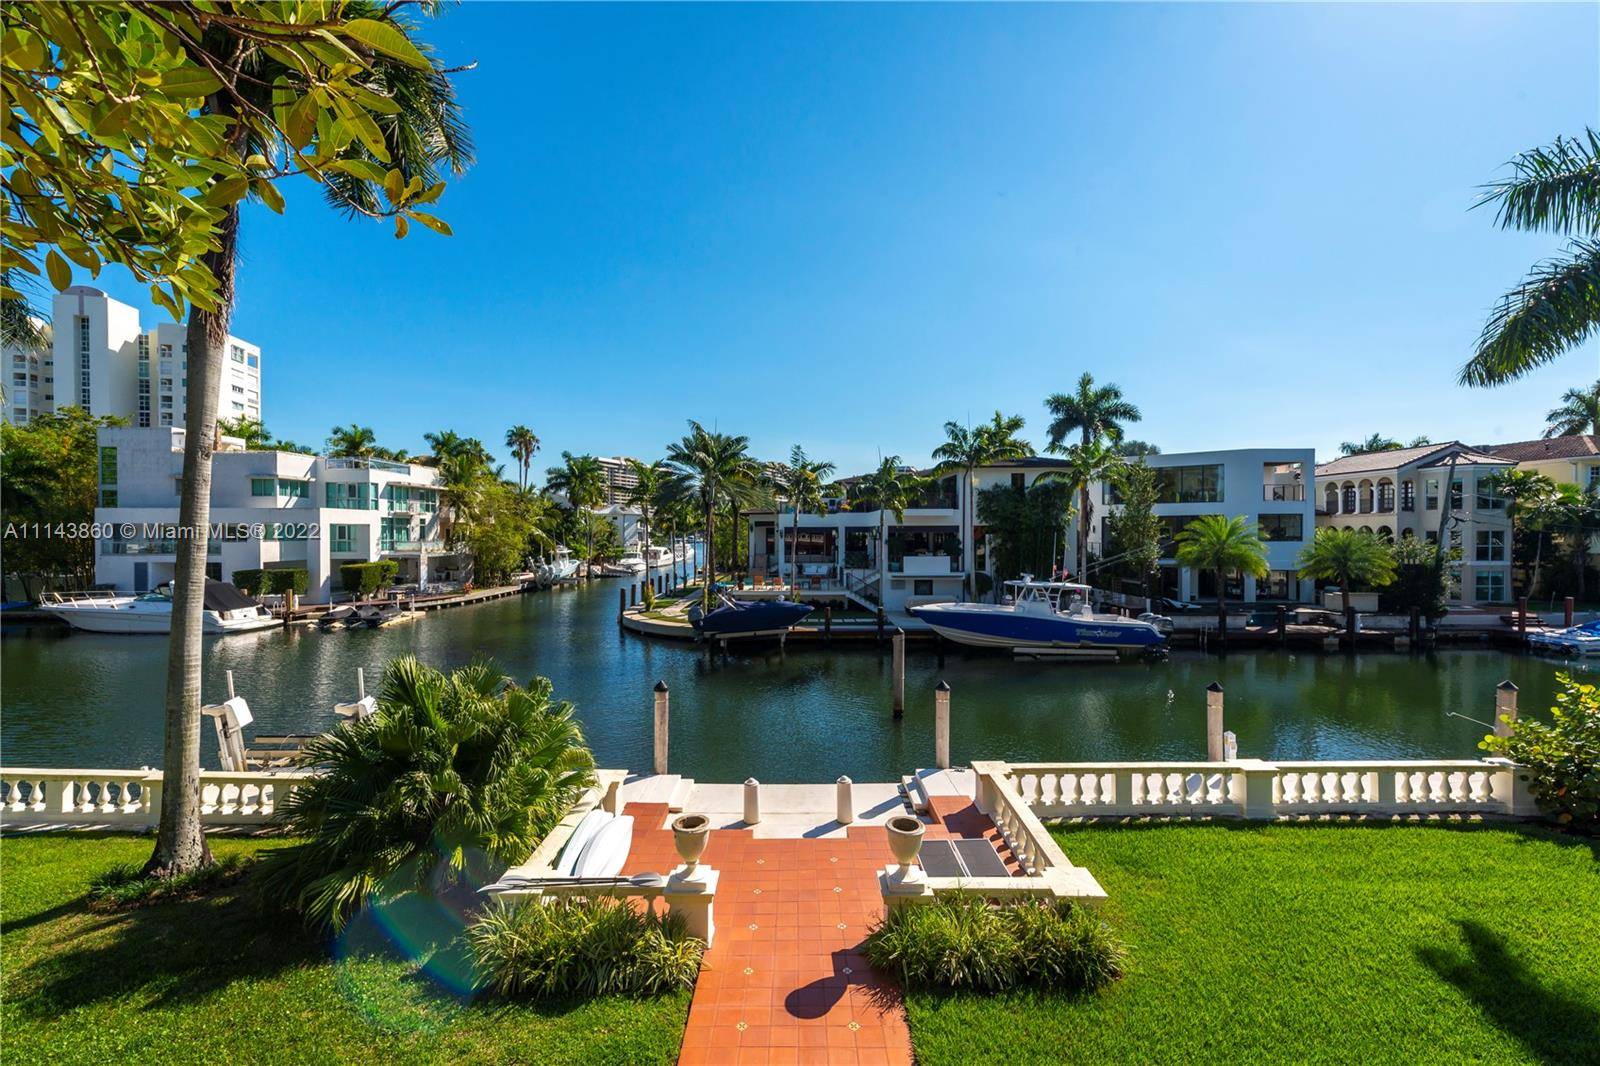 Amazing opportunity to rent this waterfront Mediterranean estate for 6 8 months.